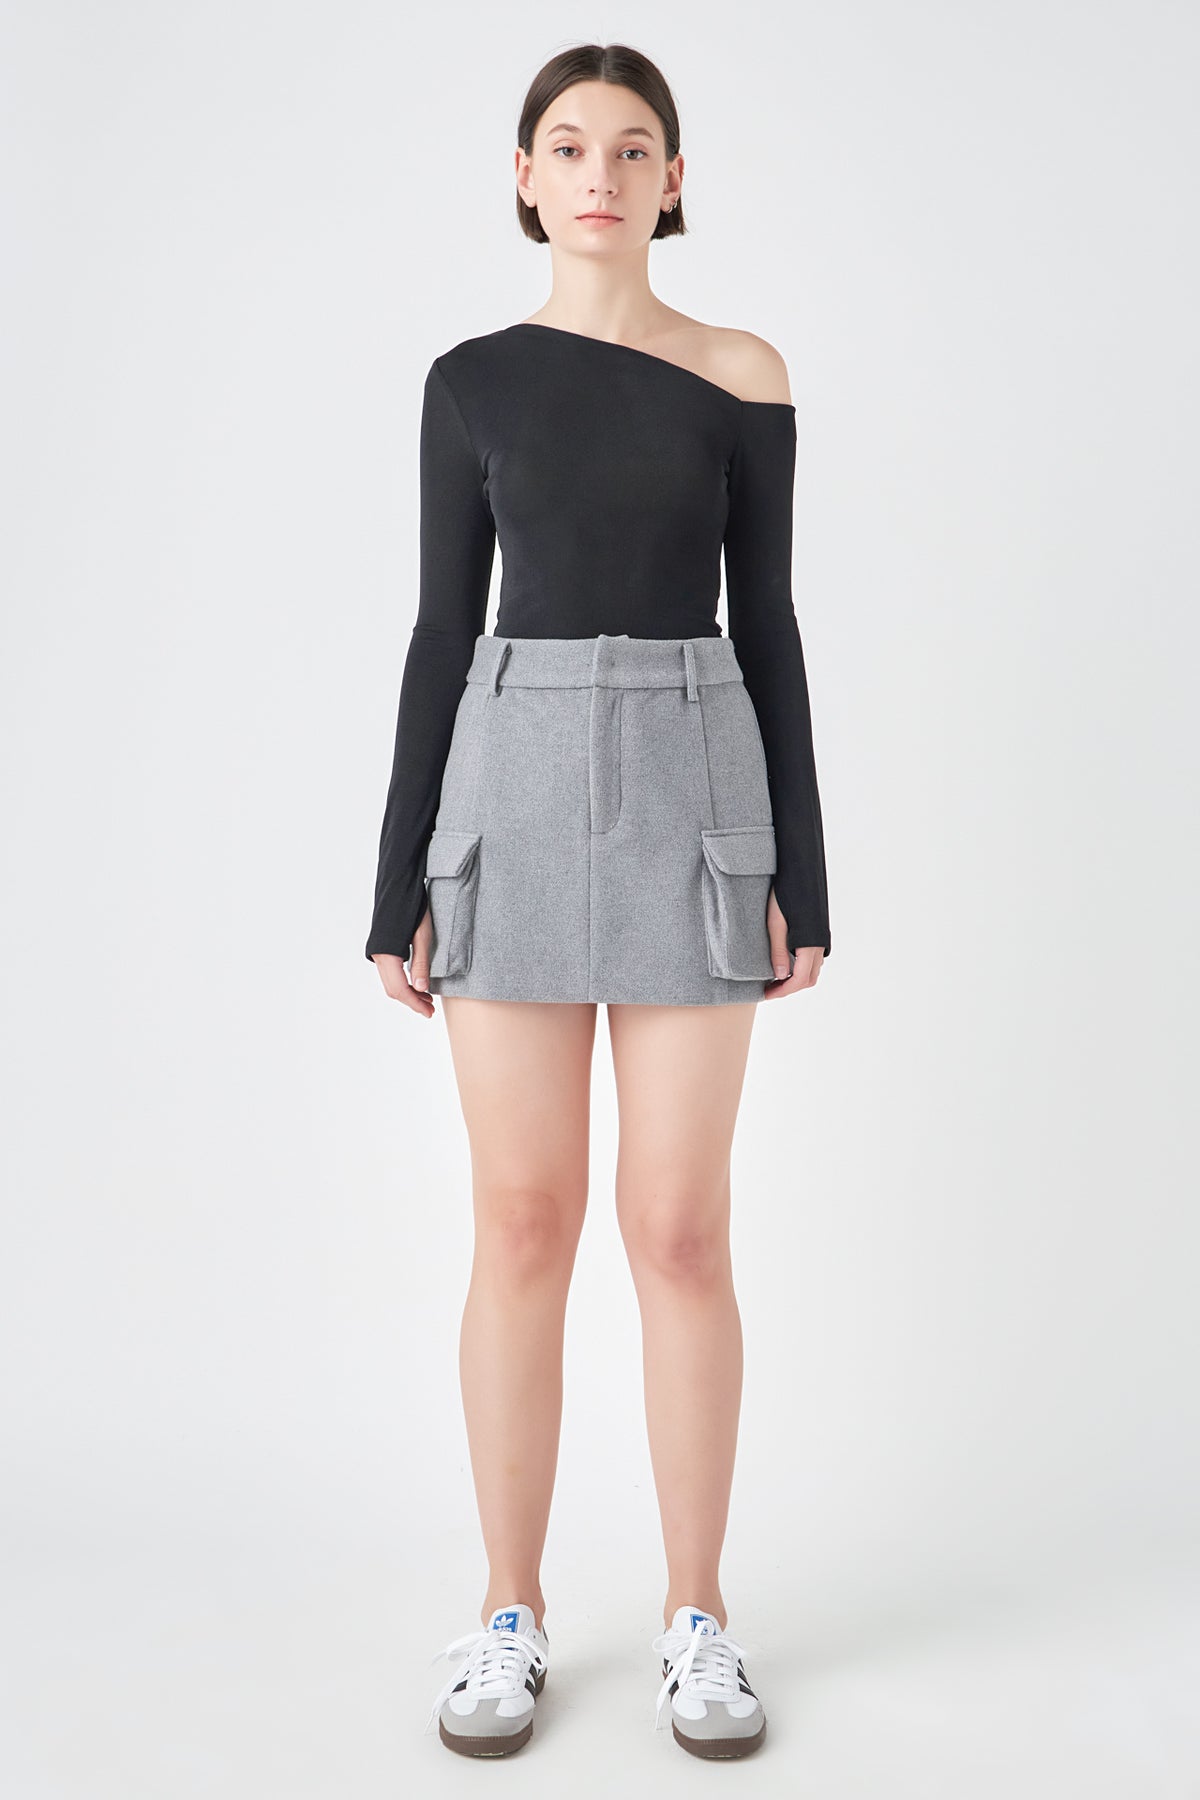 GREY LAB - Asymmetric Shoulder Top - TOPS available at Objectrare